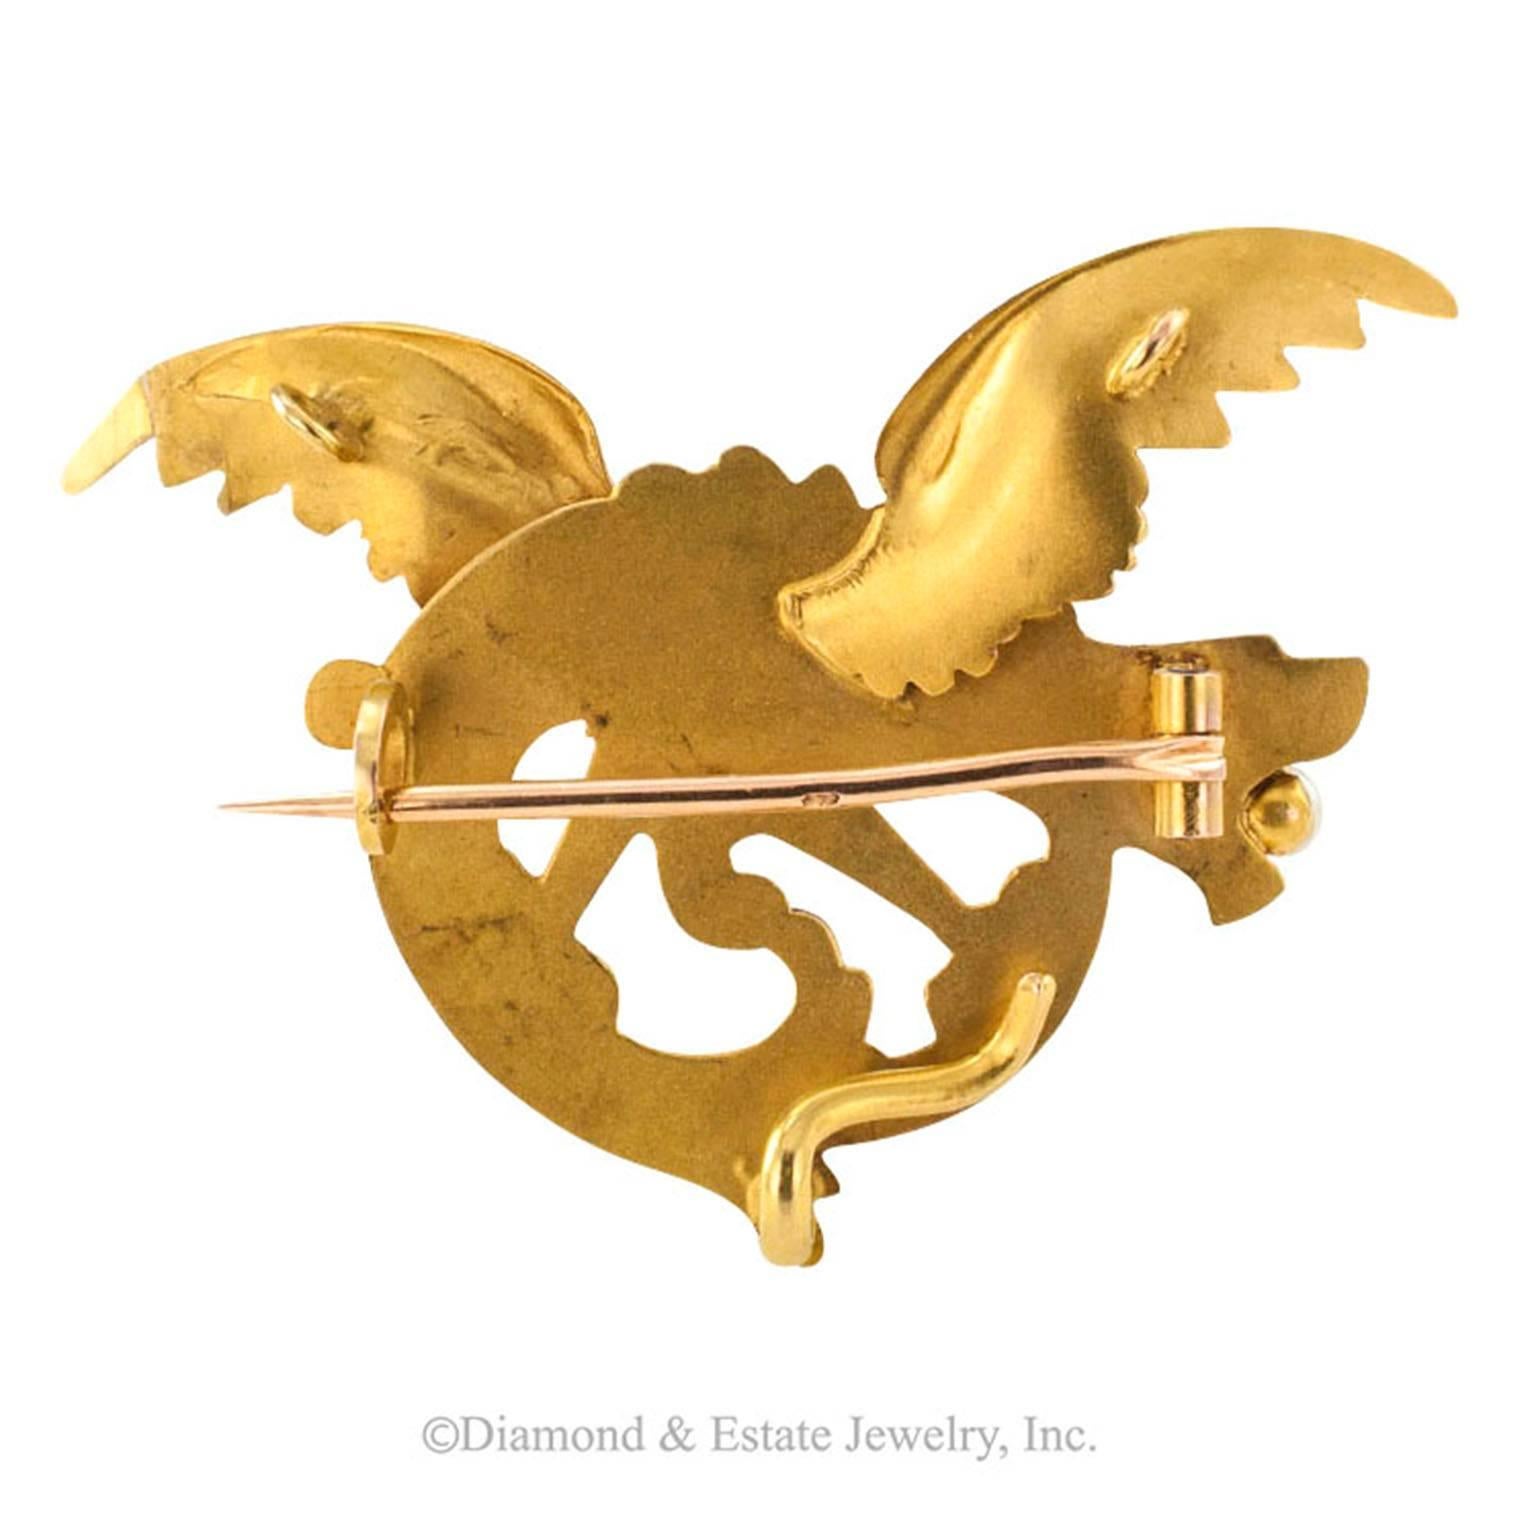 French Antique 18-Karat Gold Dragon Brooch

18-karat gold Art Nouveau dragon brooch with ruby eye and pearl-gripping tongue, French hallmarks, very pristine.  The back side fitted with a hook and a pair of loops on the wings to facilitate